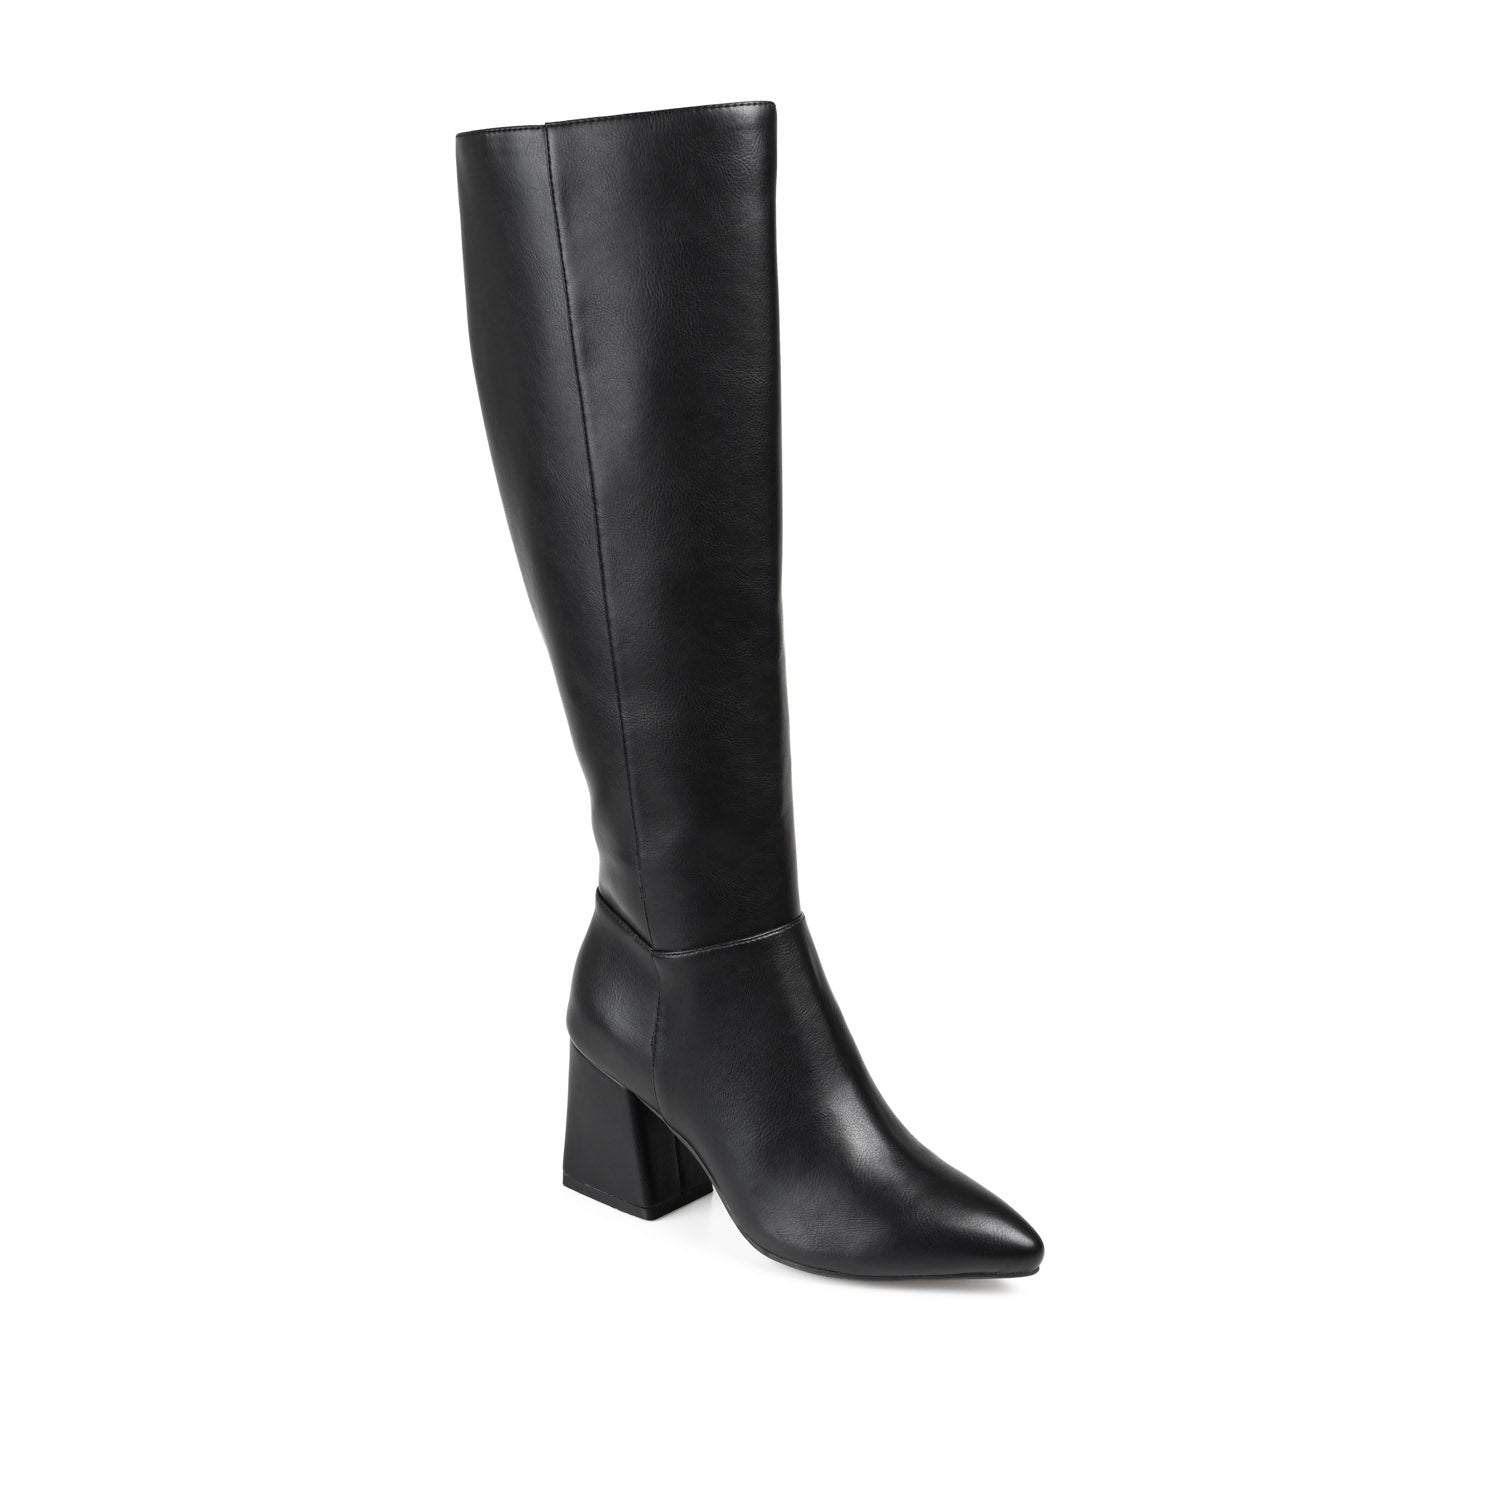 LANDREE KNEE-HIGH BOOTS IN FAUX LEATHER